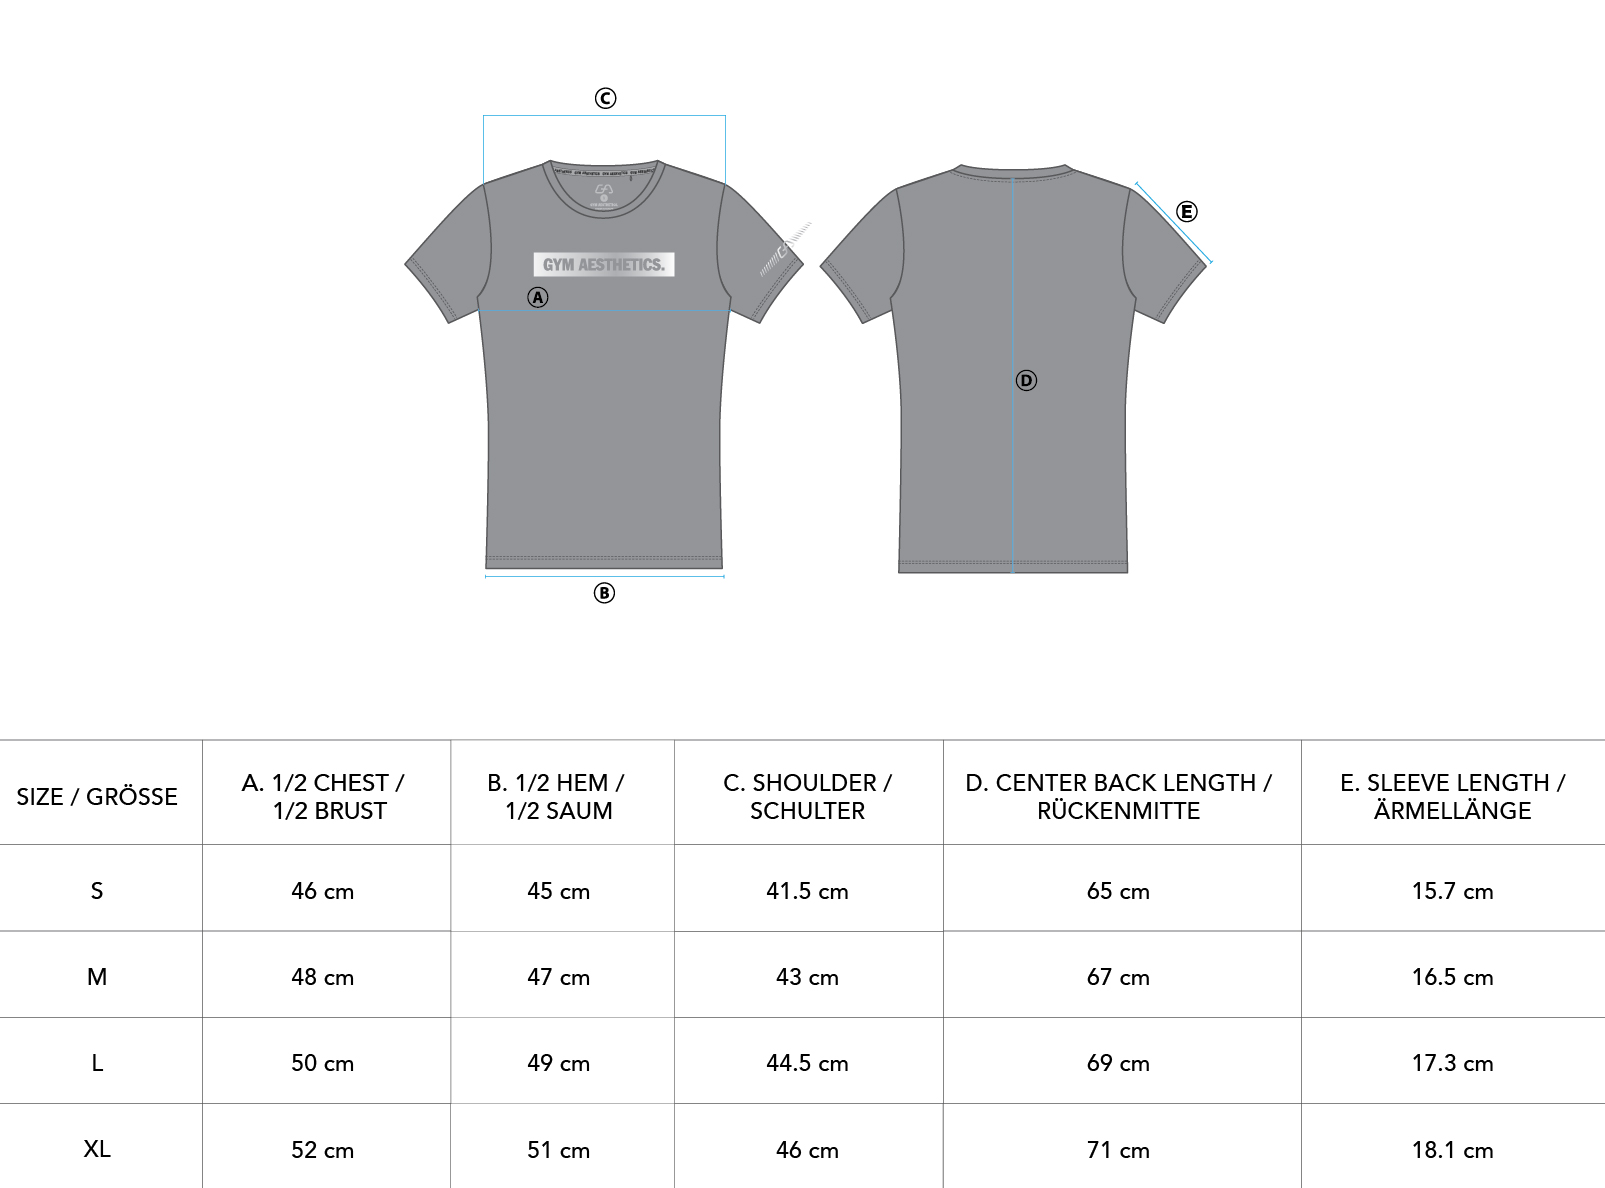 Branded Tight-Fit T-Shirt Intensity for Men - size chart | Gym Aesthetics